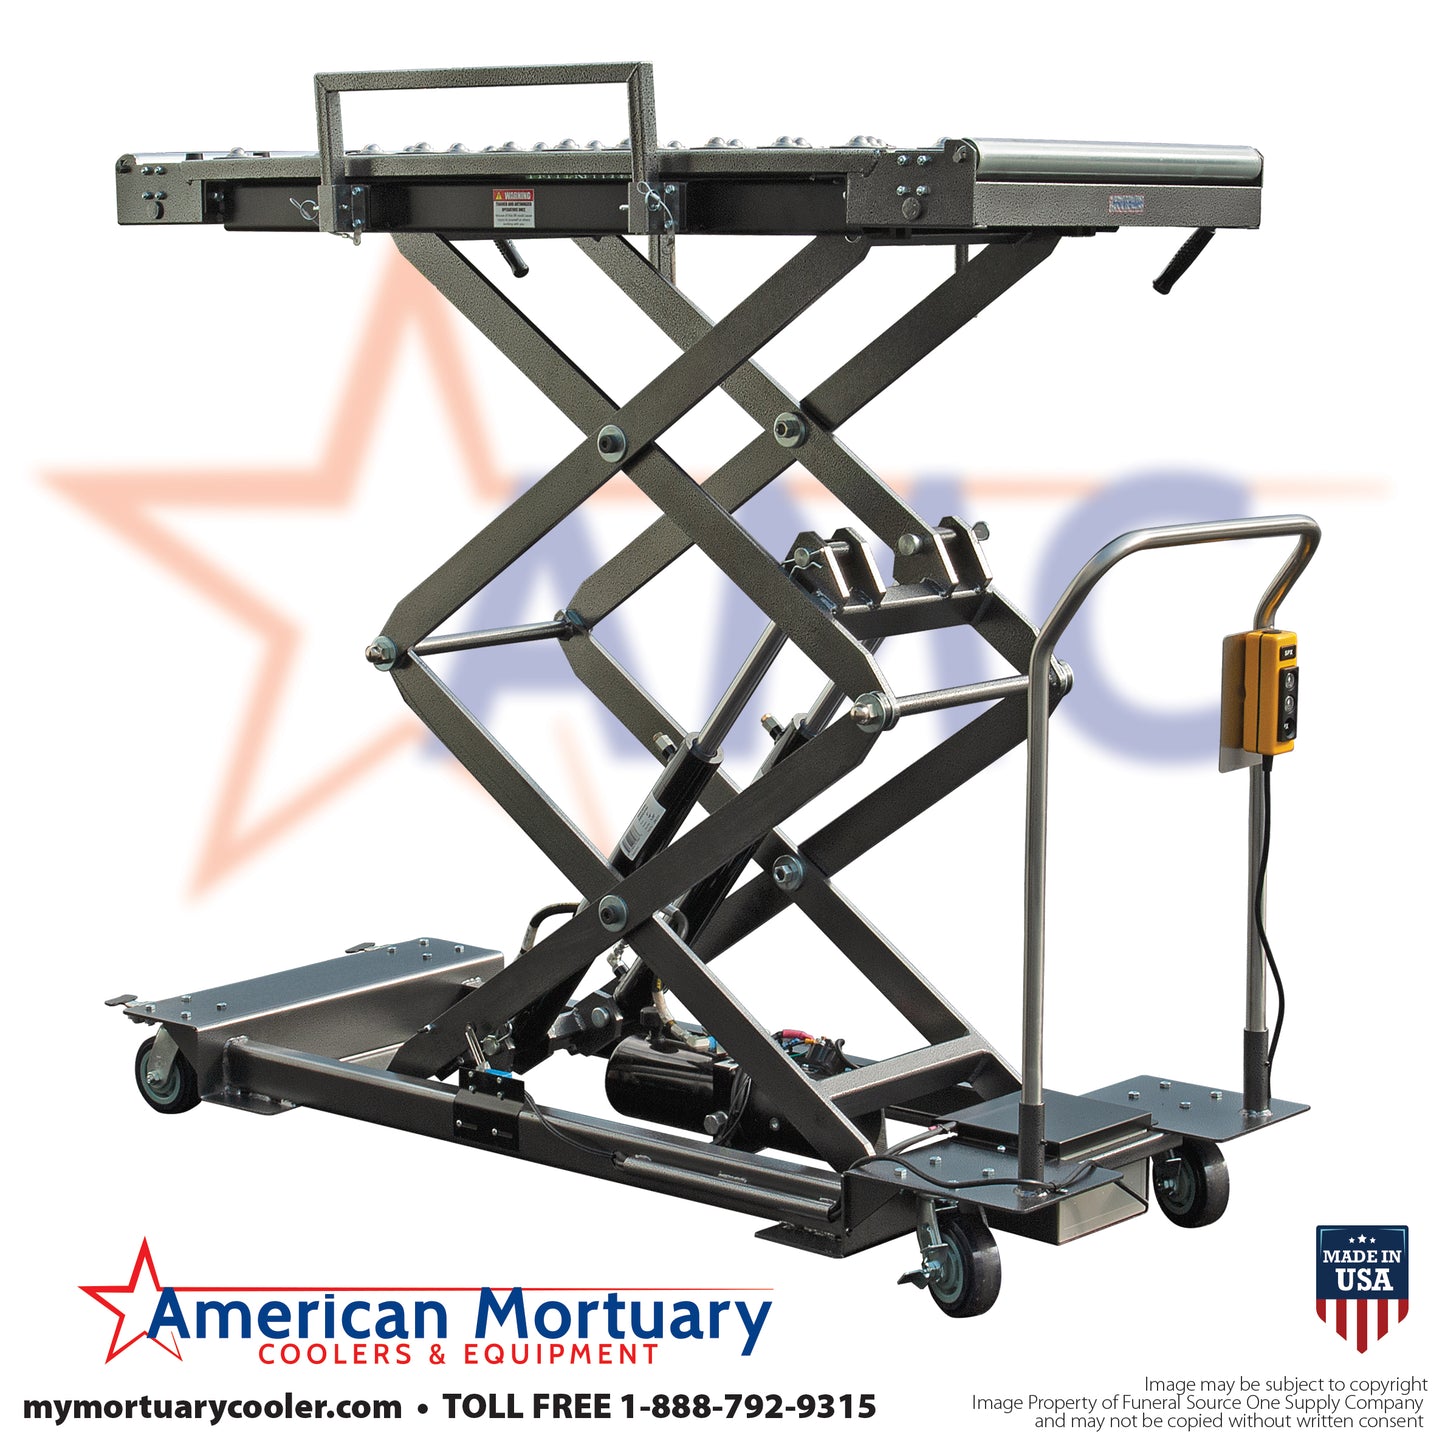 HD 1000 Low Load Powered Crematory Lift